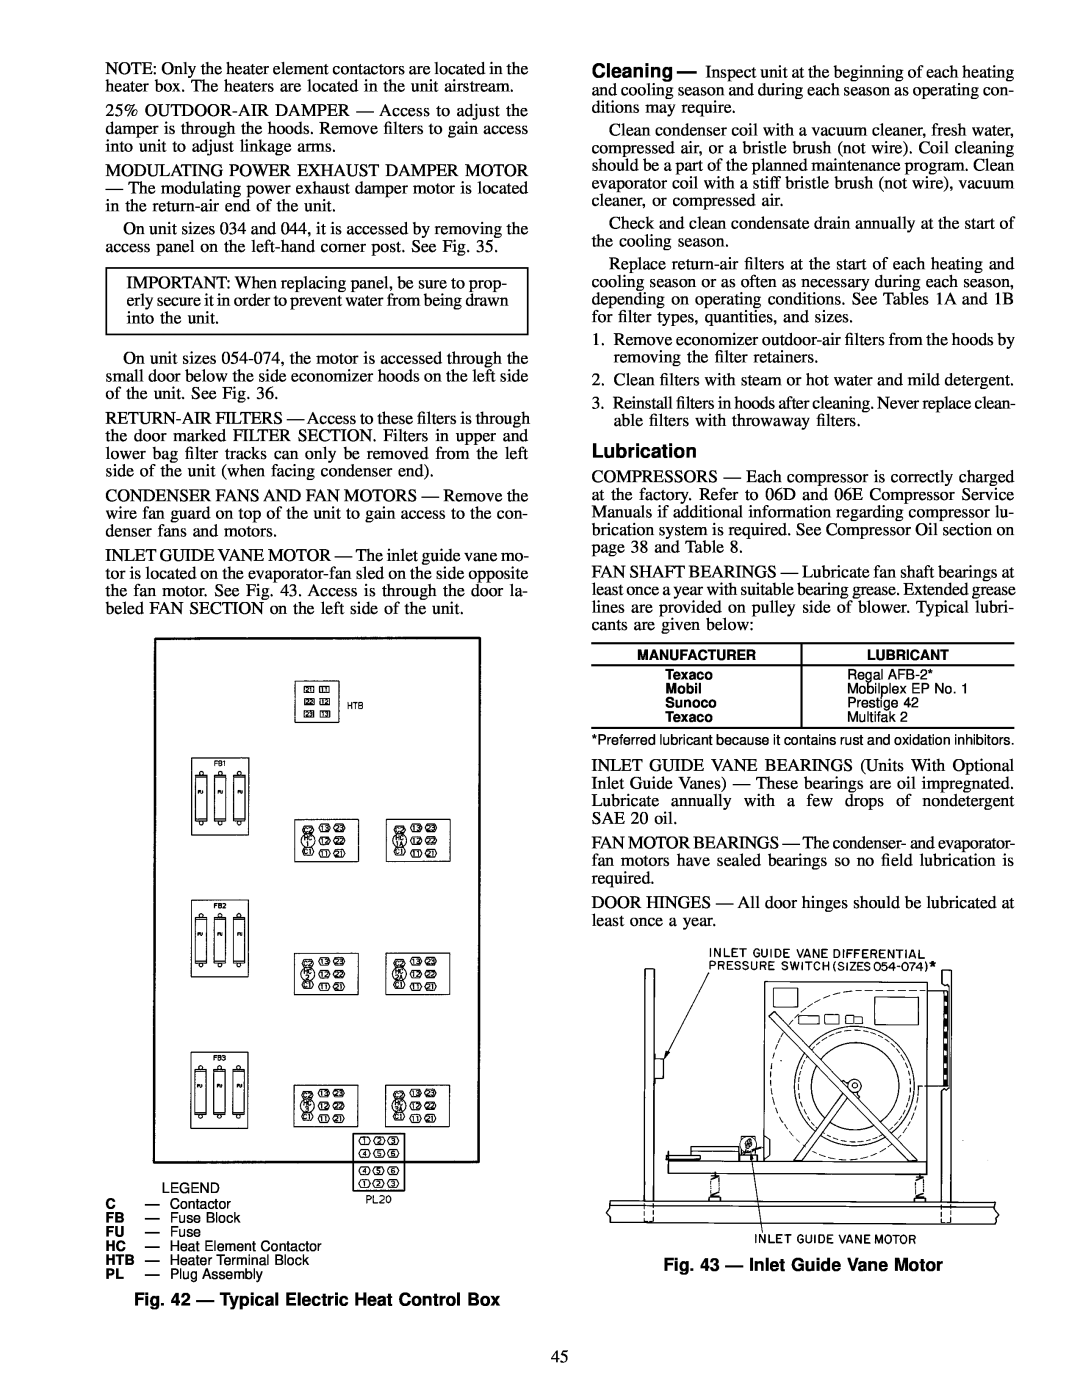 Carrier NP034-074 specifications Lubrication, Ð Typical Electric Heat Control Box, Ð Inlet Guide Vane Motor 